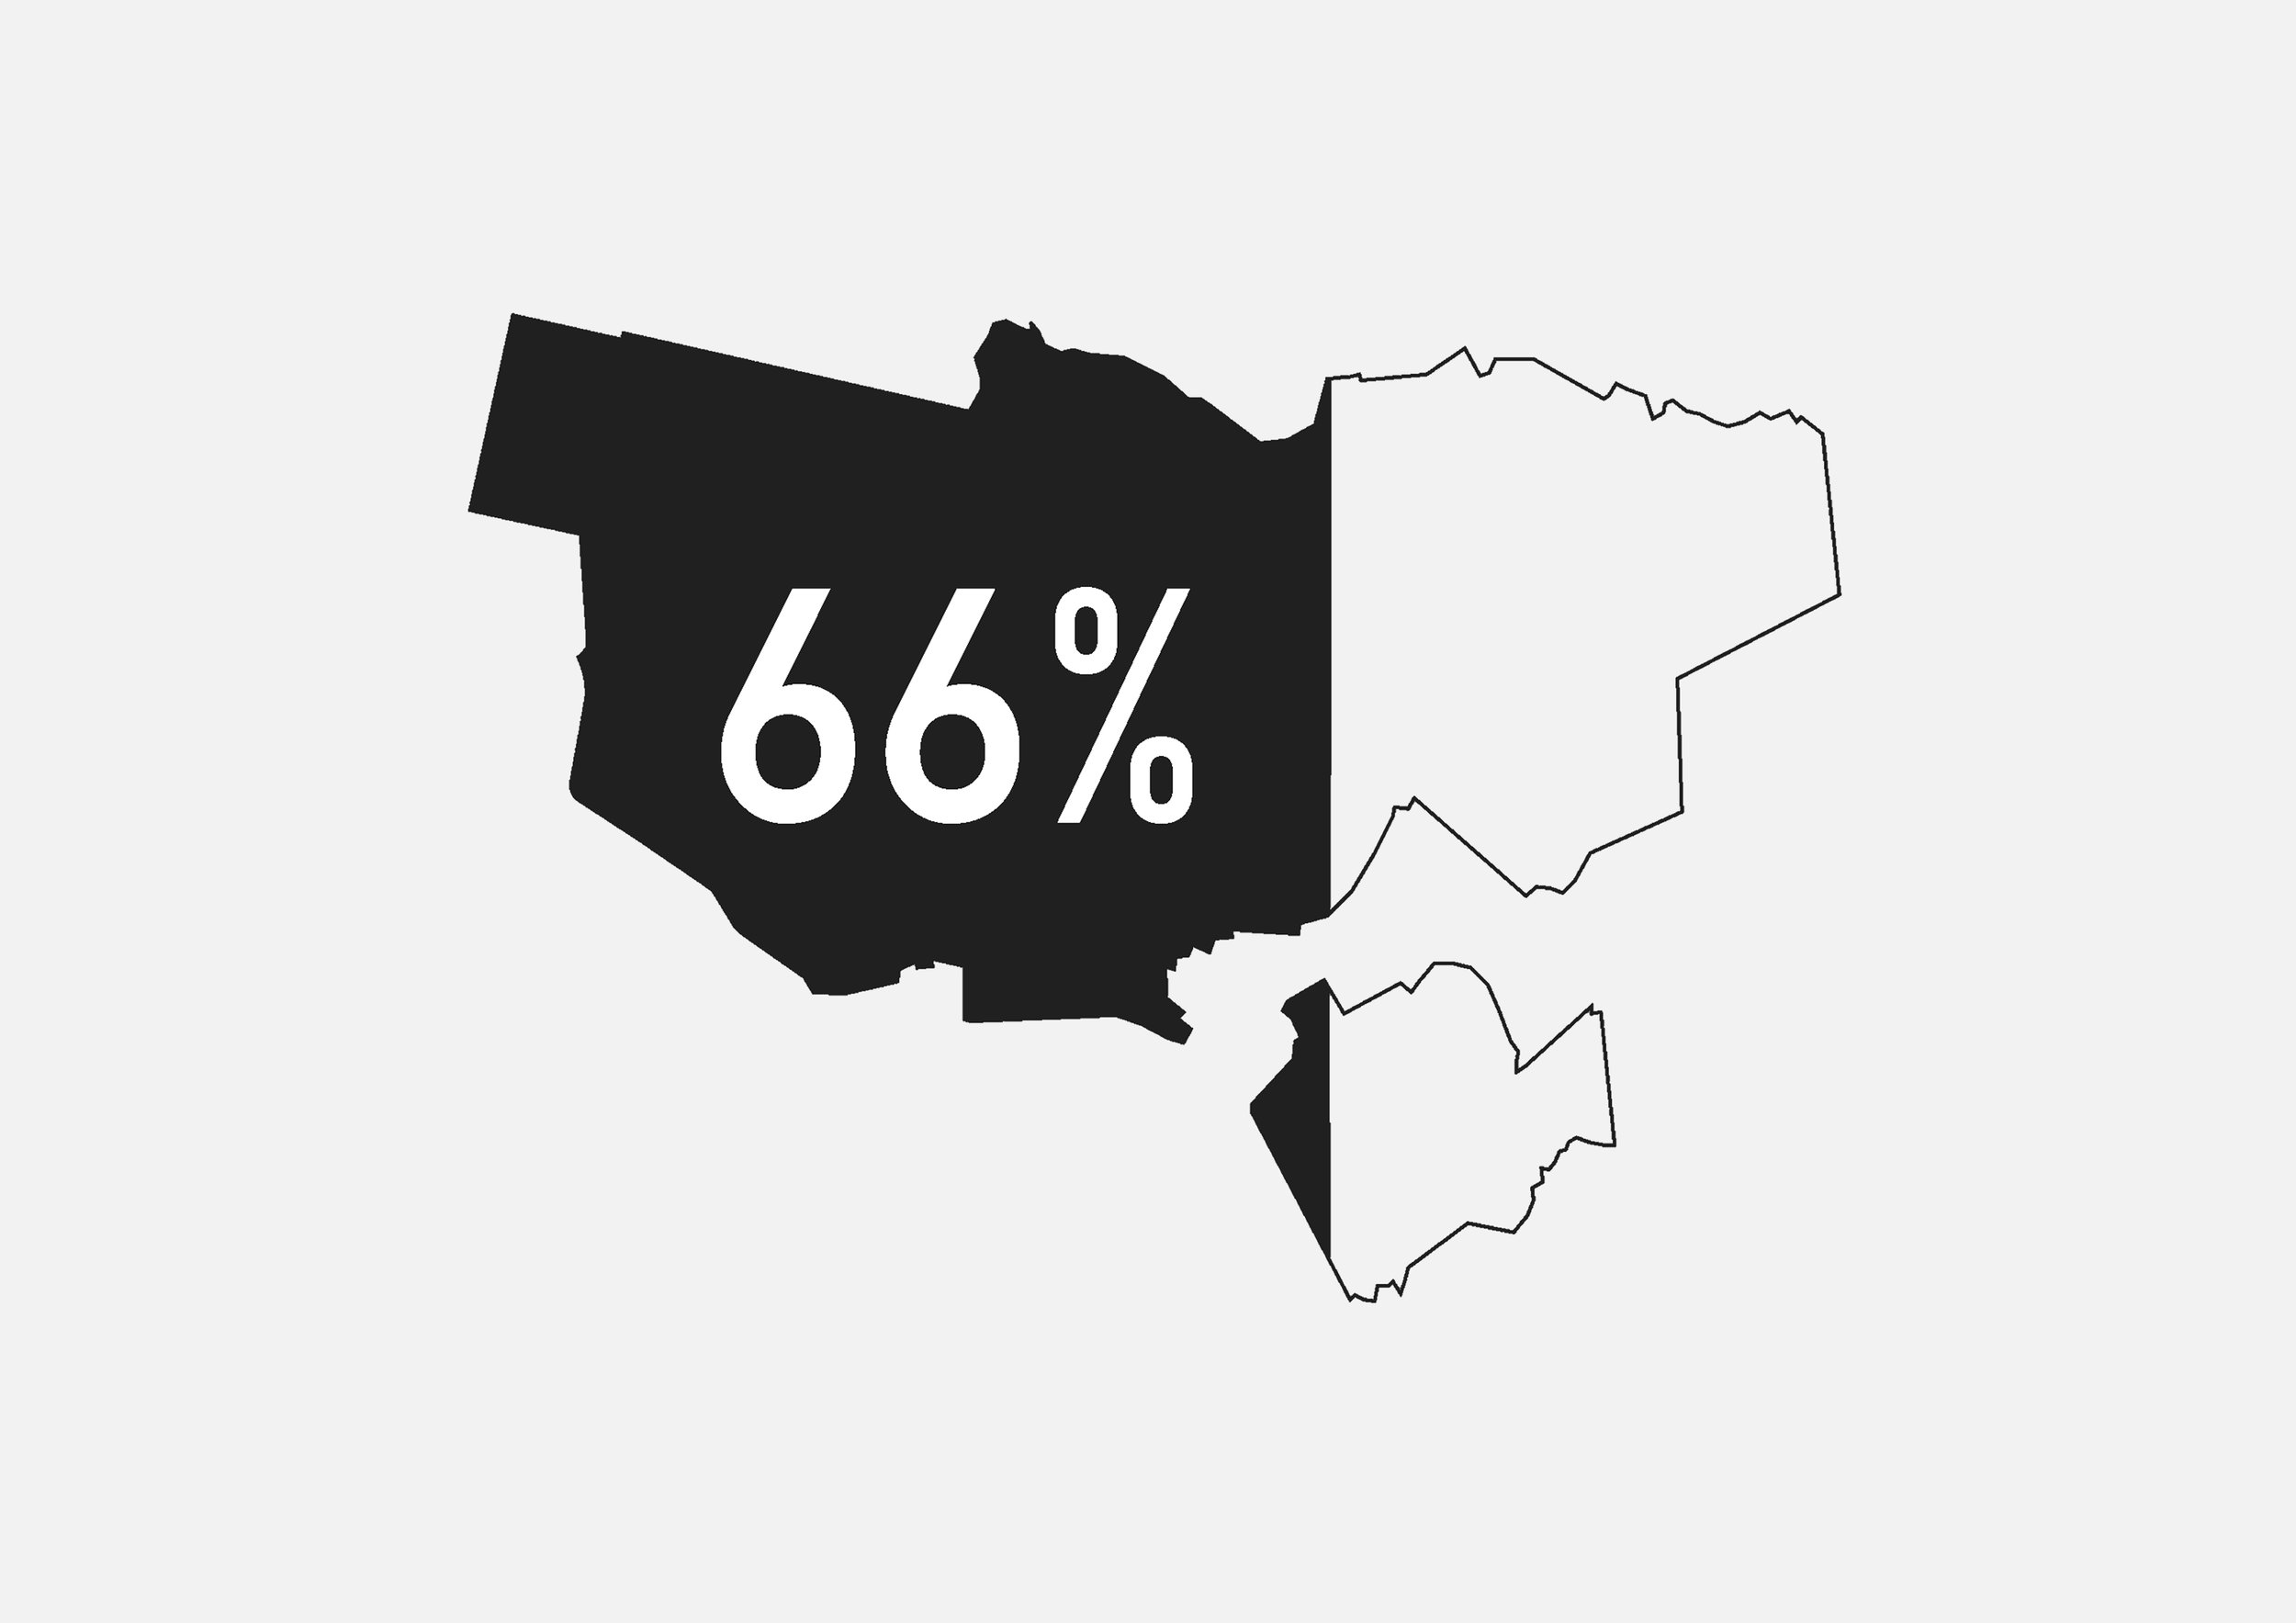  66% of the area of Amsterdam is within environmental zones 